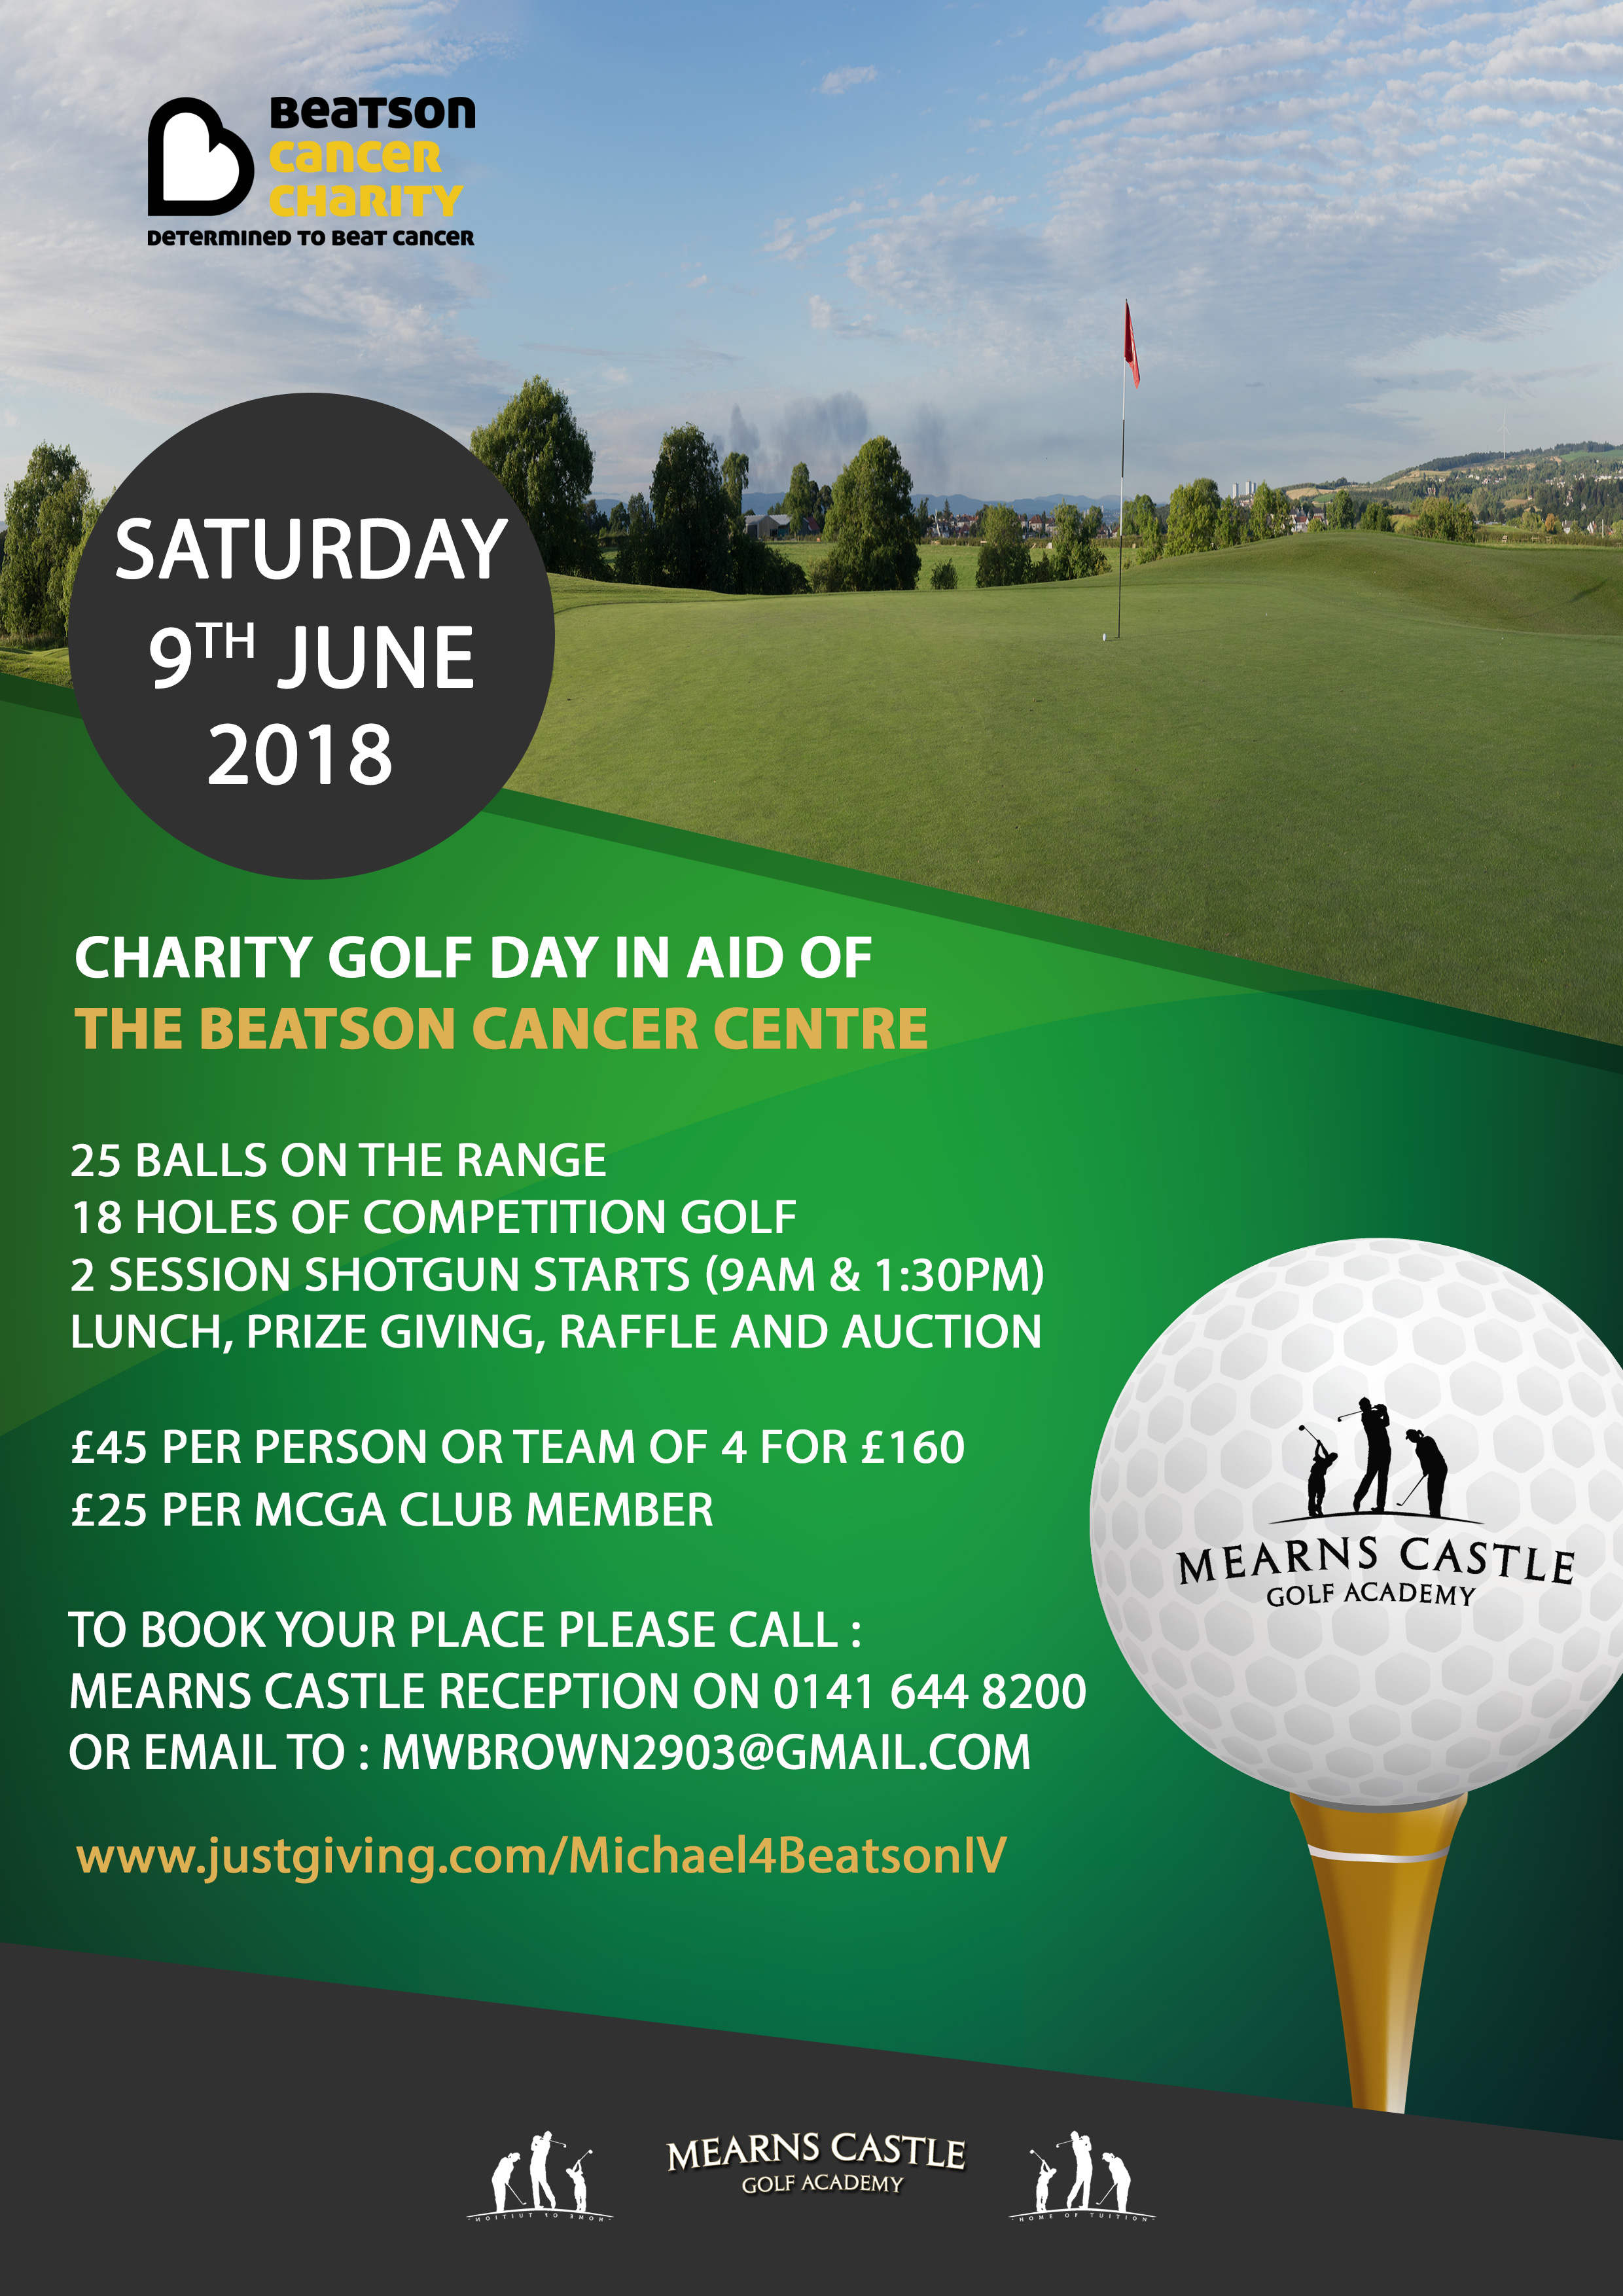 Sat 9th June – Beatson Cancer Charity Golf Day.